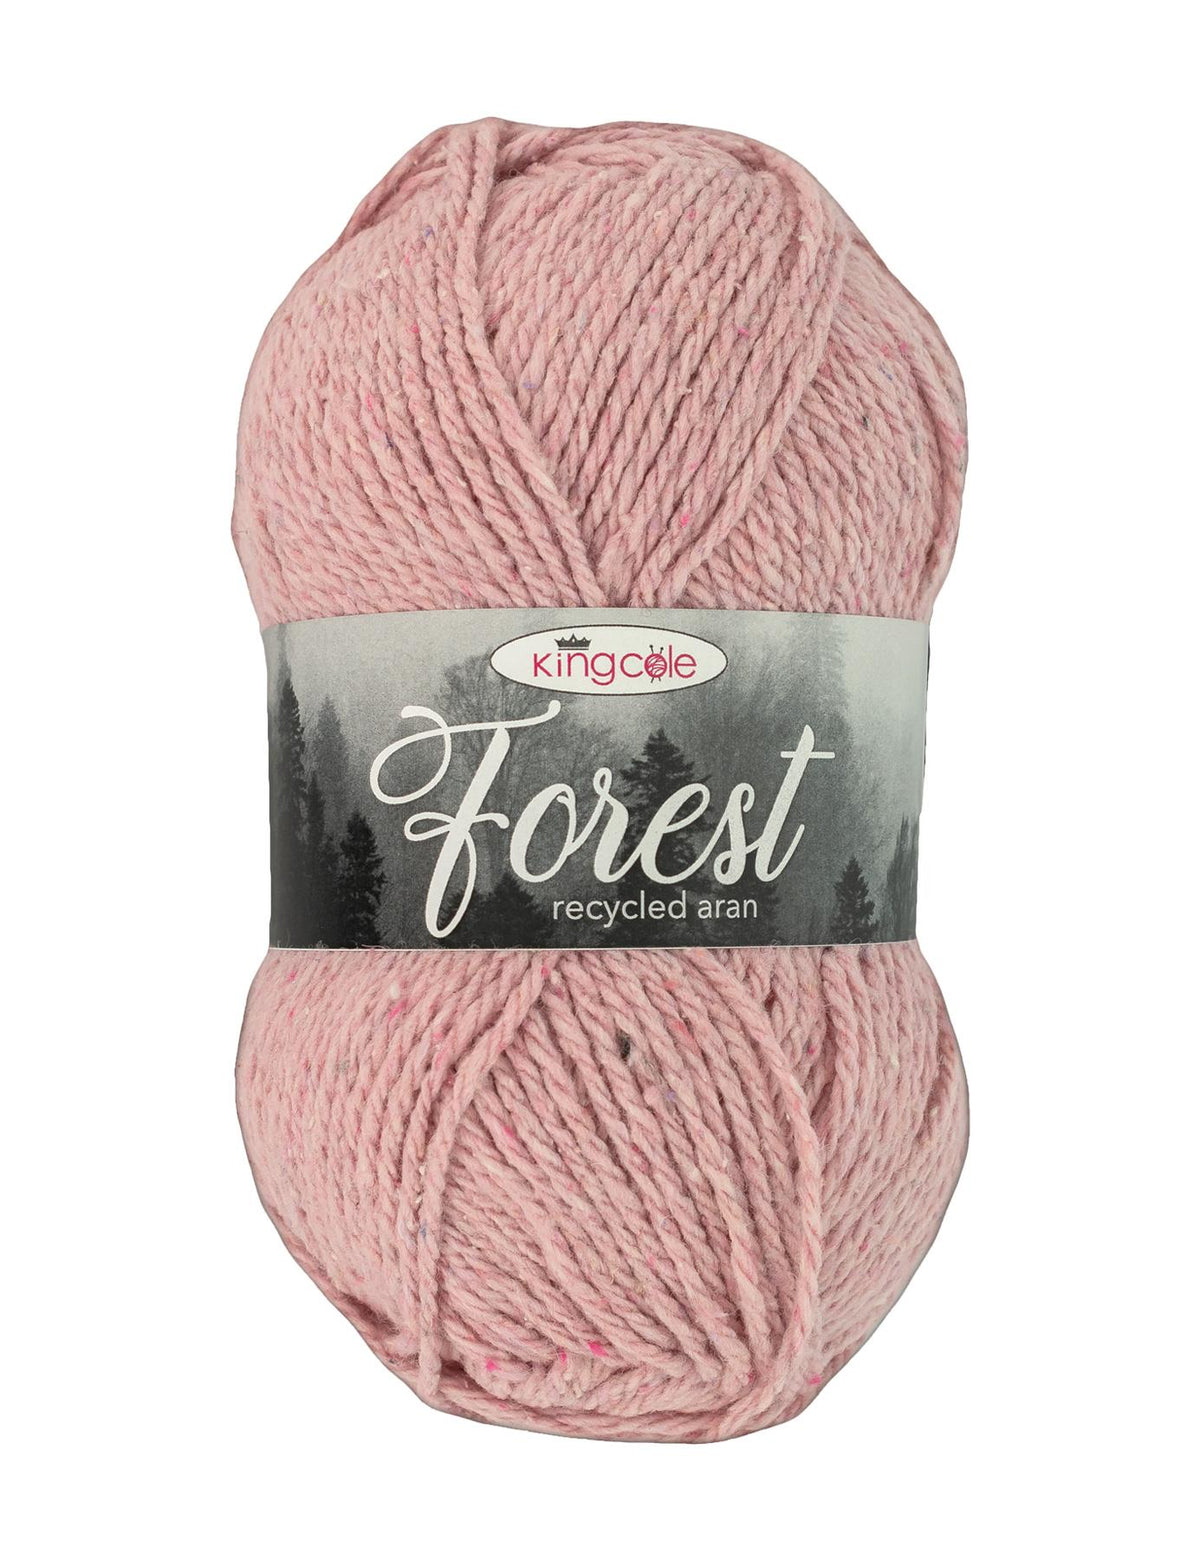 Wyre Forest 100% recycled aran yarn by King Cole (100g)